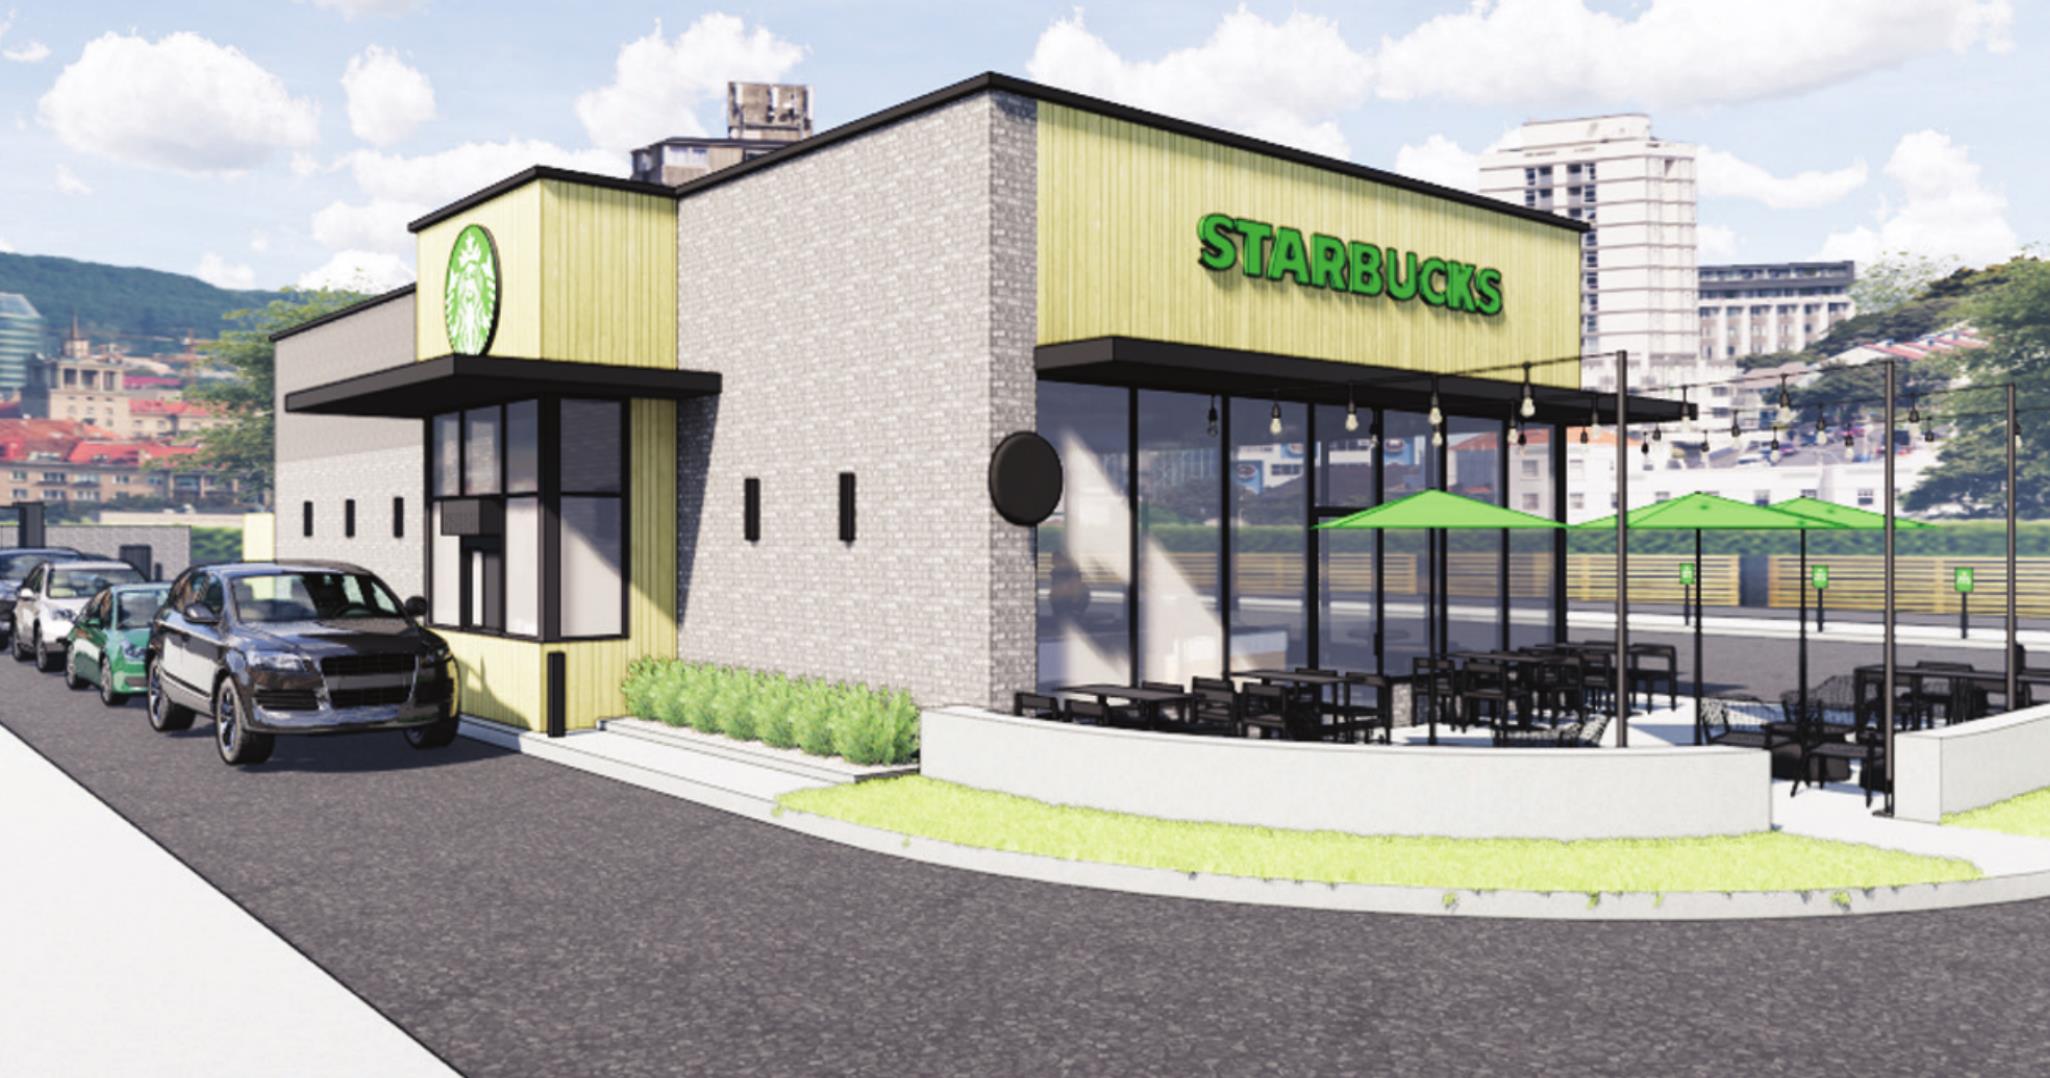 Starbucks will open a store in Weatherford north of McDonald’s on the west side of Washington Avenue. Provided